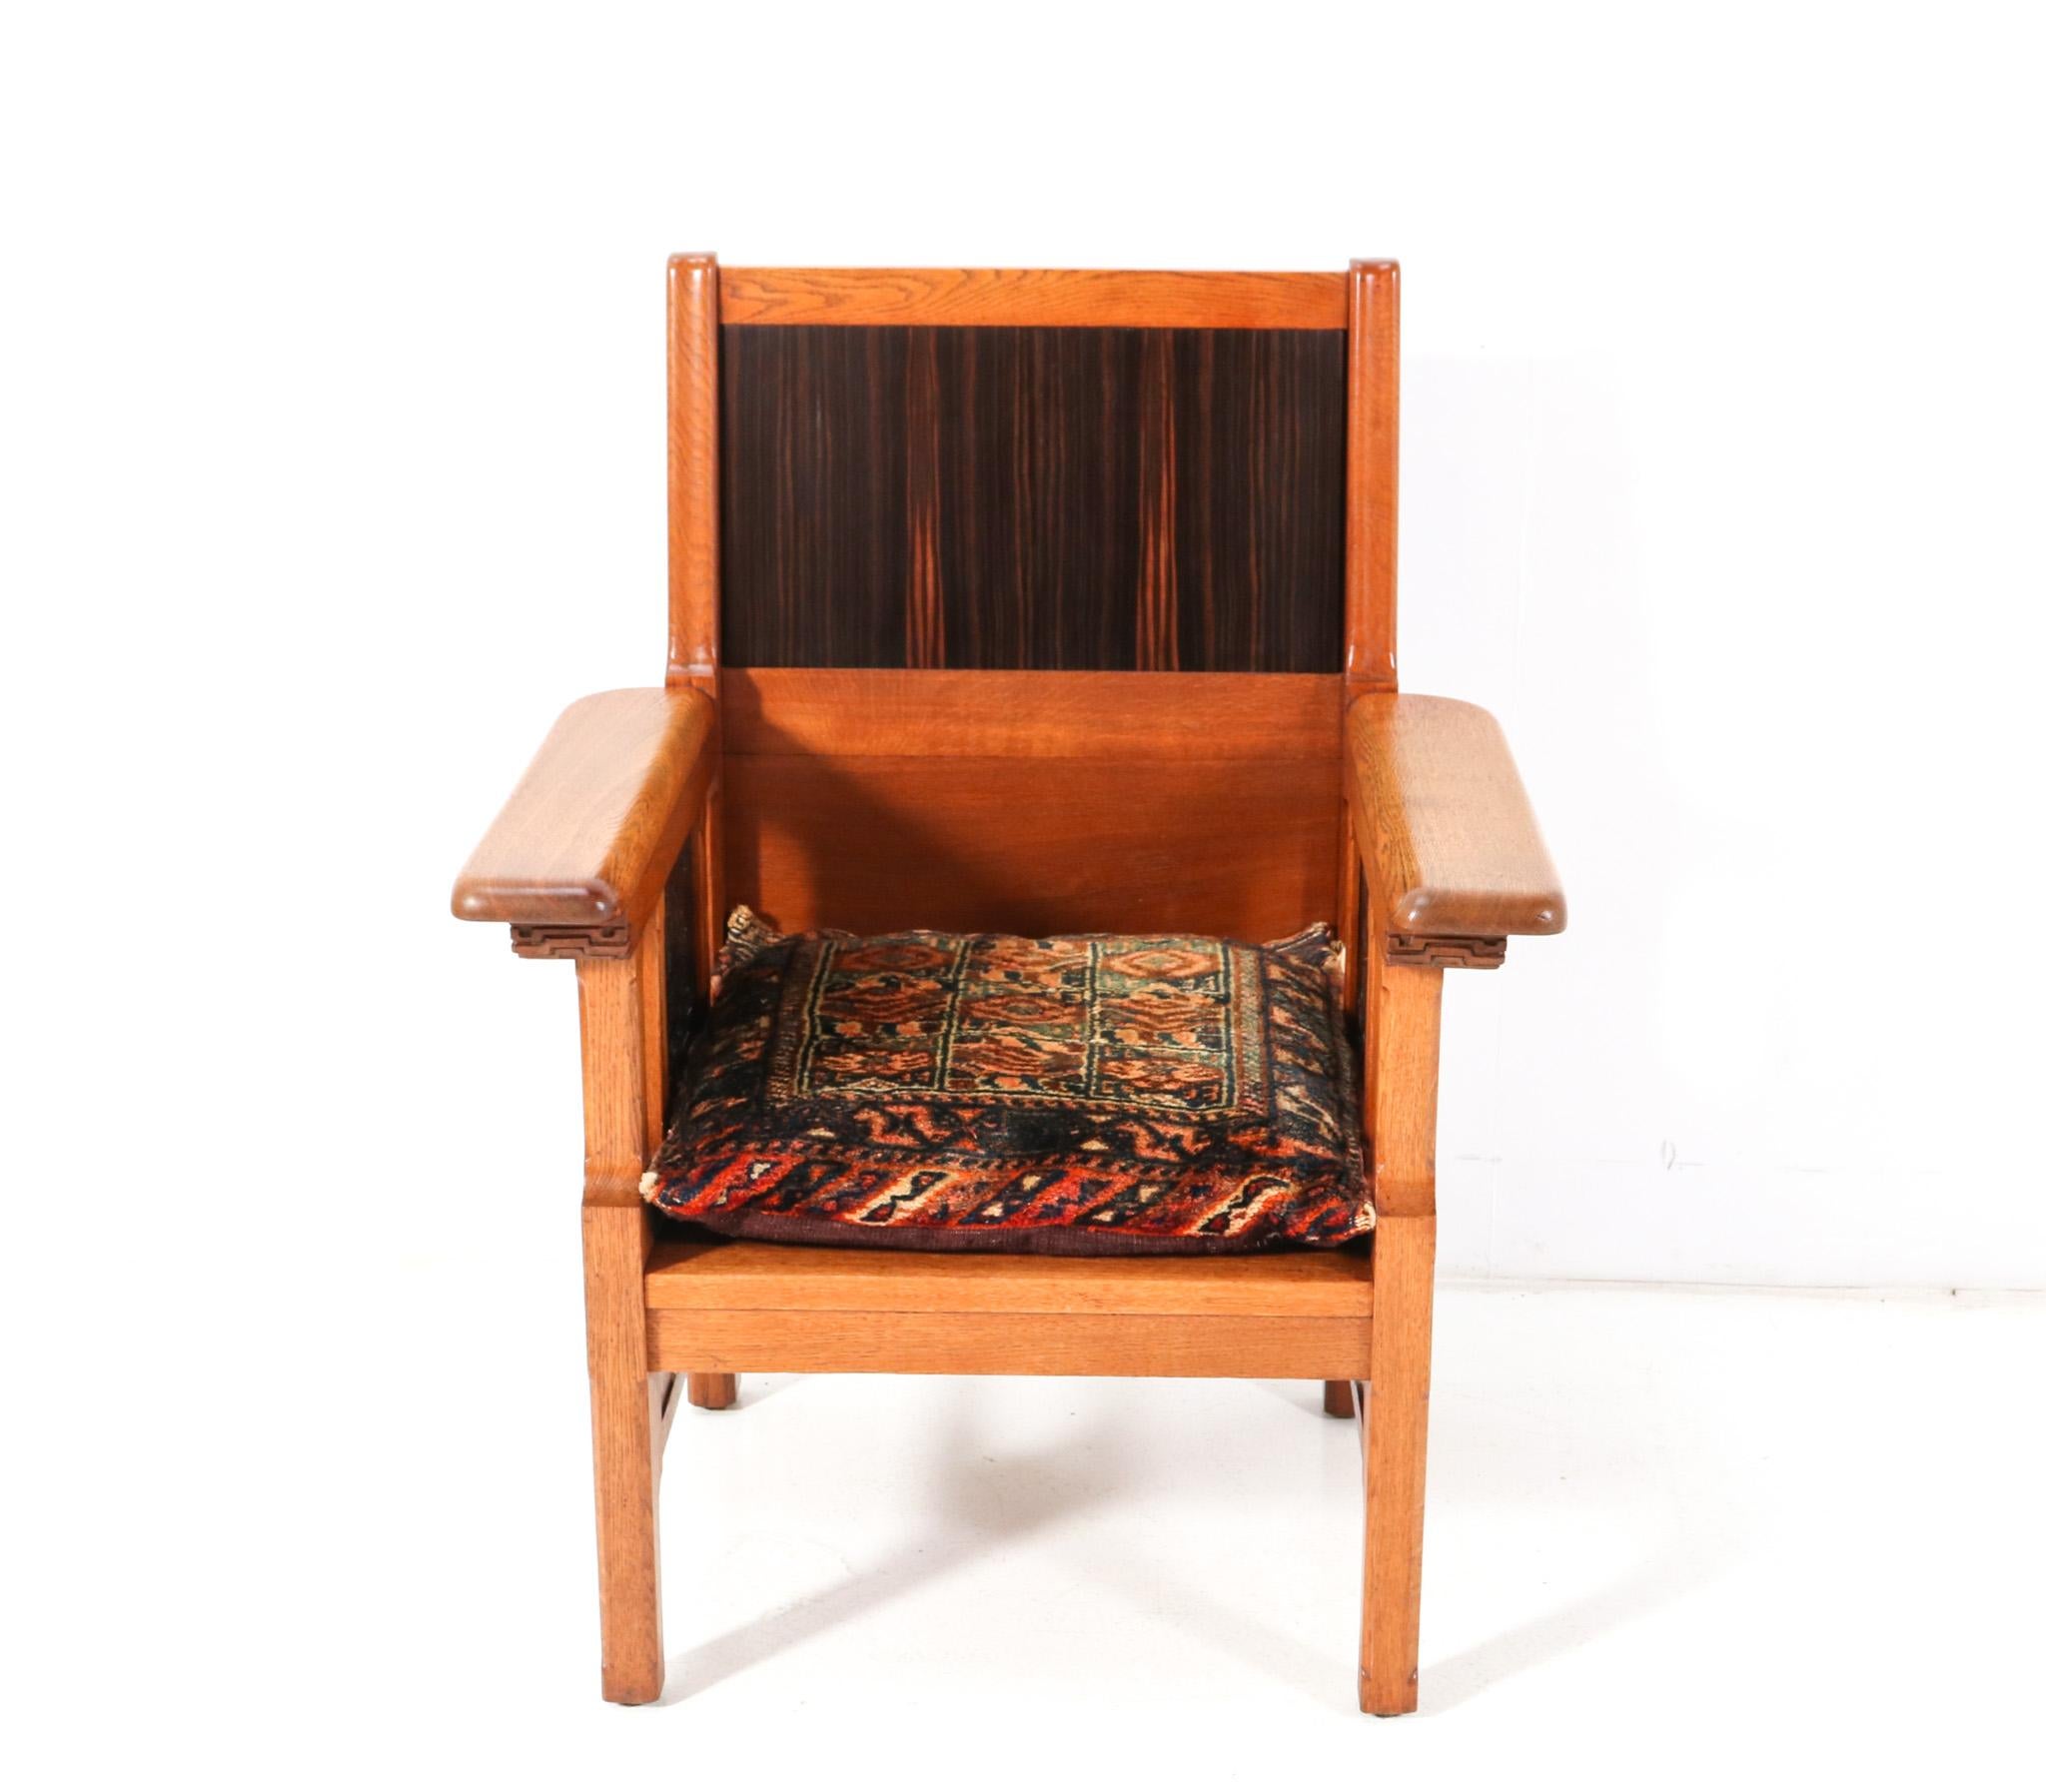 Magnificent and rare Arts & Crafts Art Nouveau armchair.
Design attributed to Carel Adolph Lion Cachet.
Solid oak base with original hand-carved elements.
Original solid macassar ebony hand-carved elements underneath the armrests.
The backside